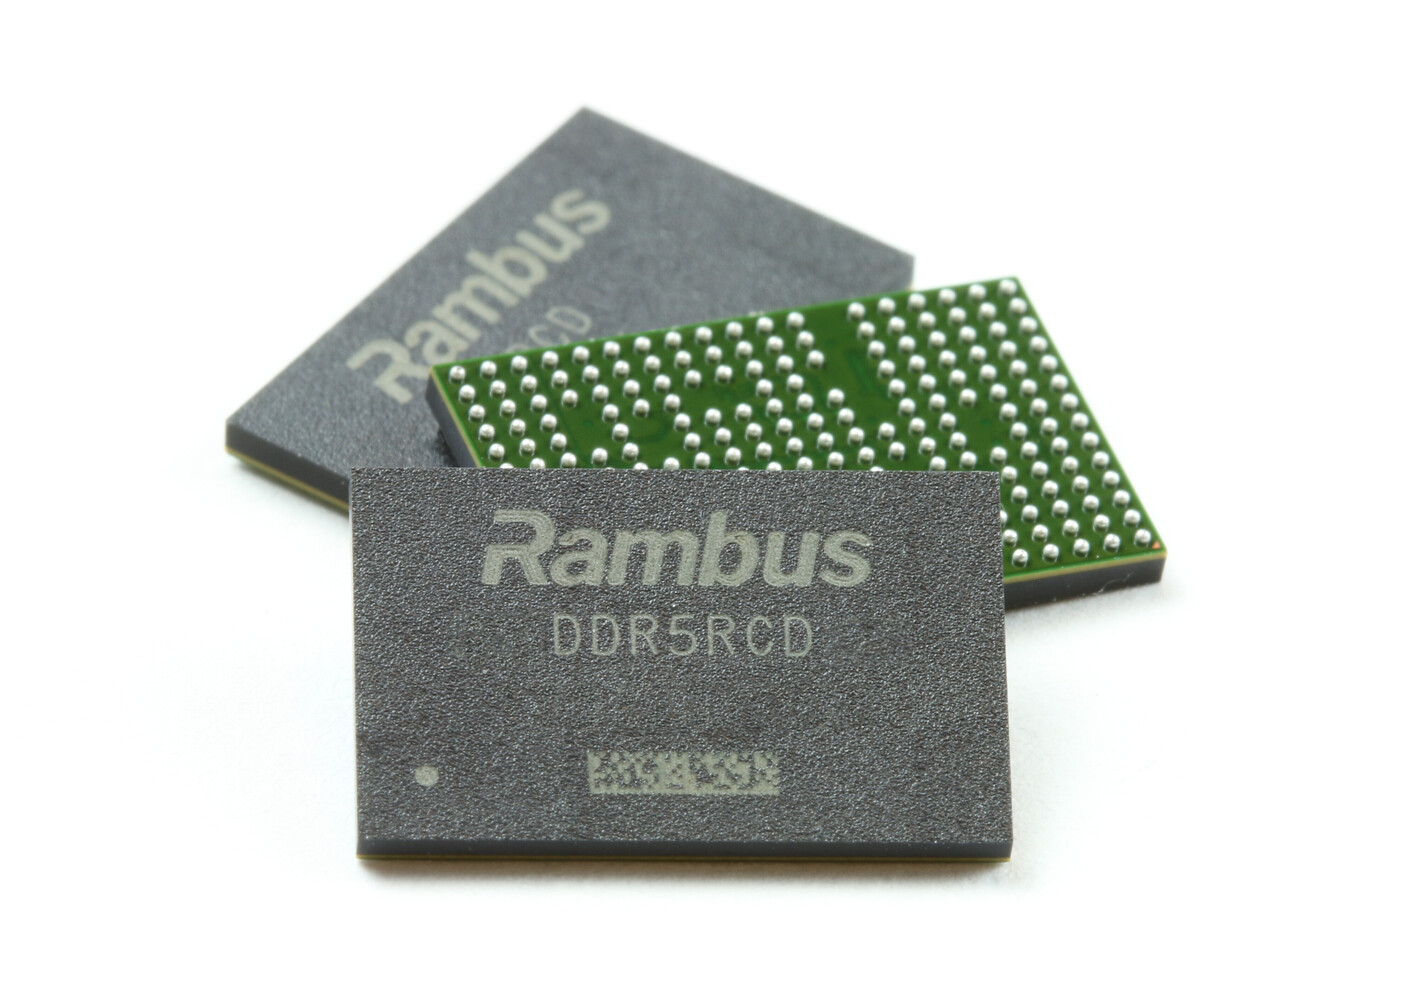 Rambus enhances server performance in data centers with the industry's first Gen4 DDR5 RCD.